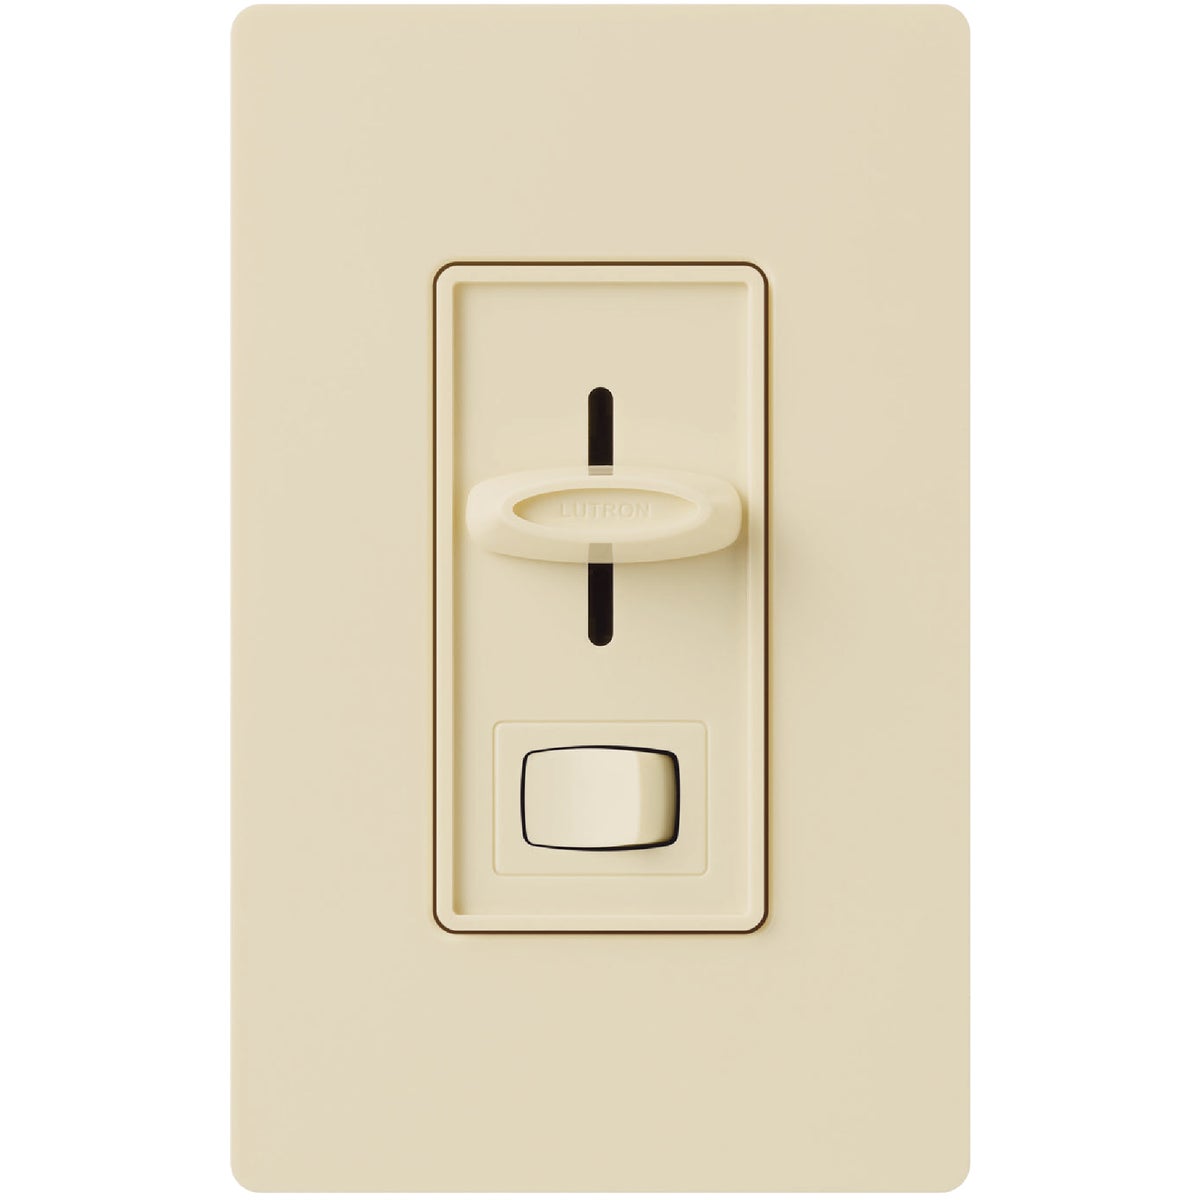 Item 500556, Dimmer which provides optimal dimming performance of LED (light emitting 